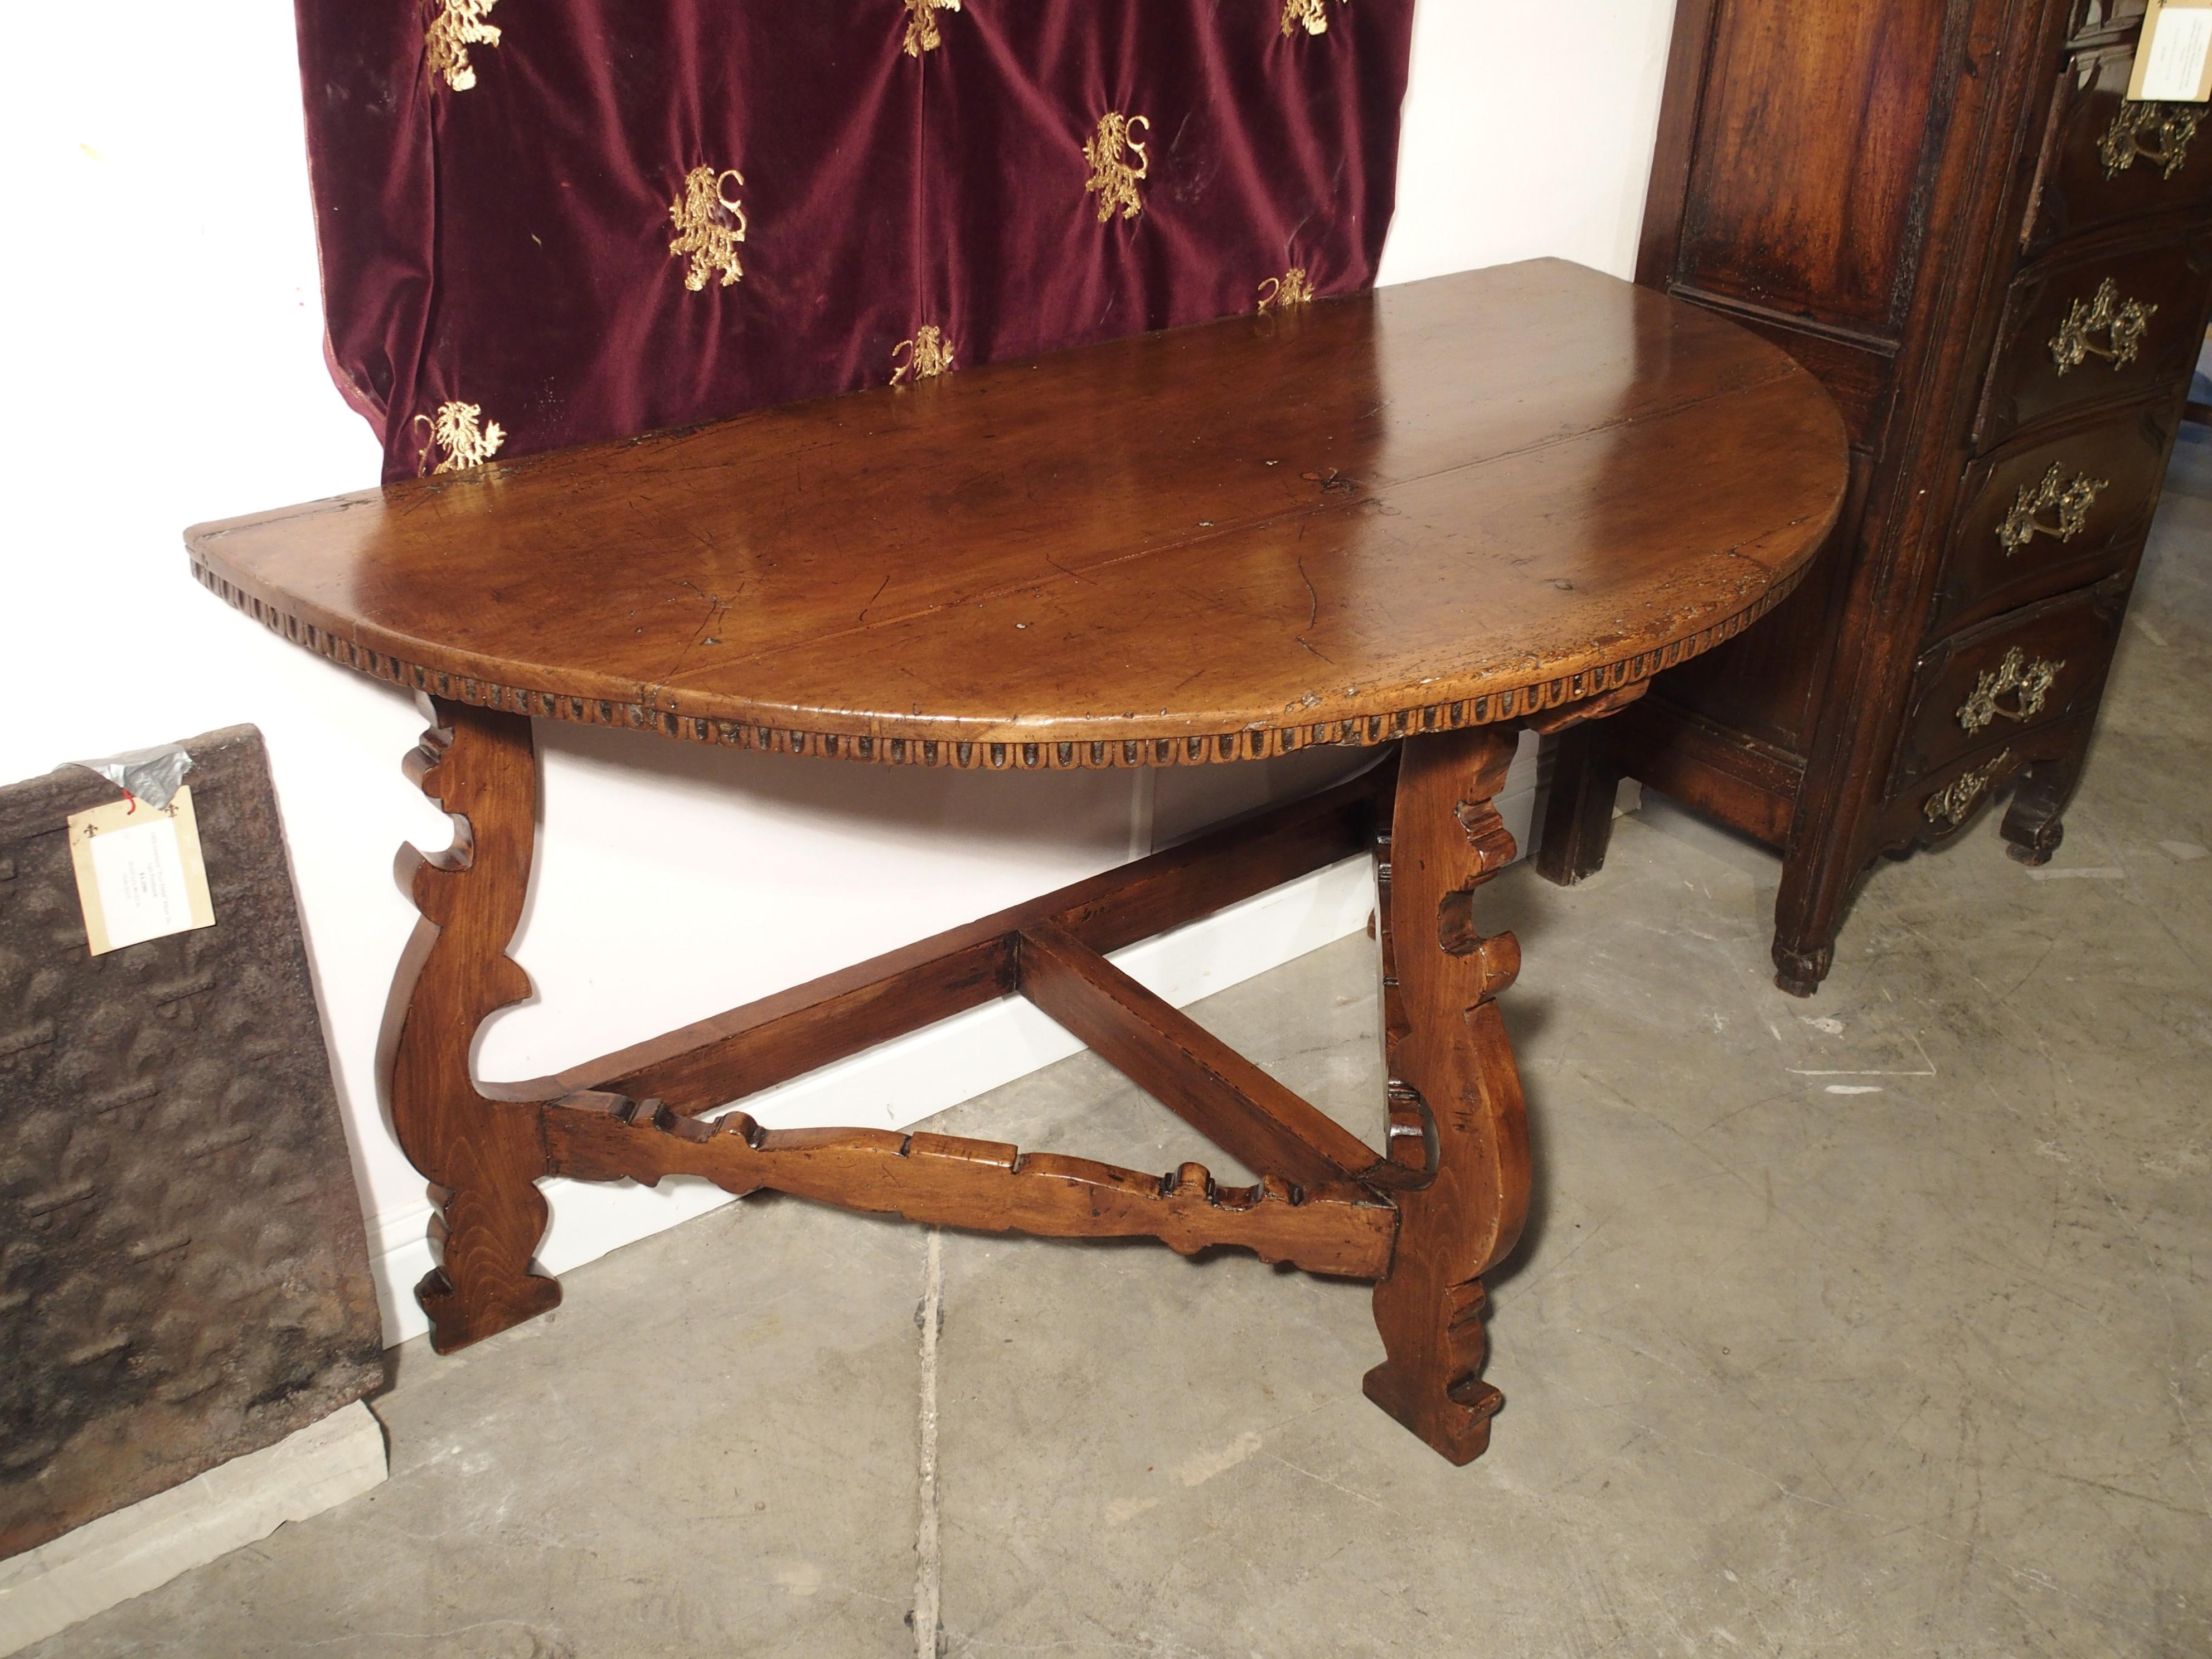 Hand-Carved 18th Century Italian Walnut Wood Demi Lune Console Table